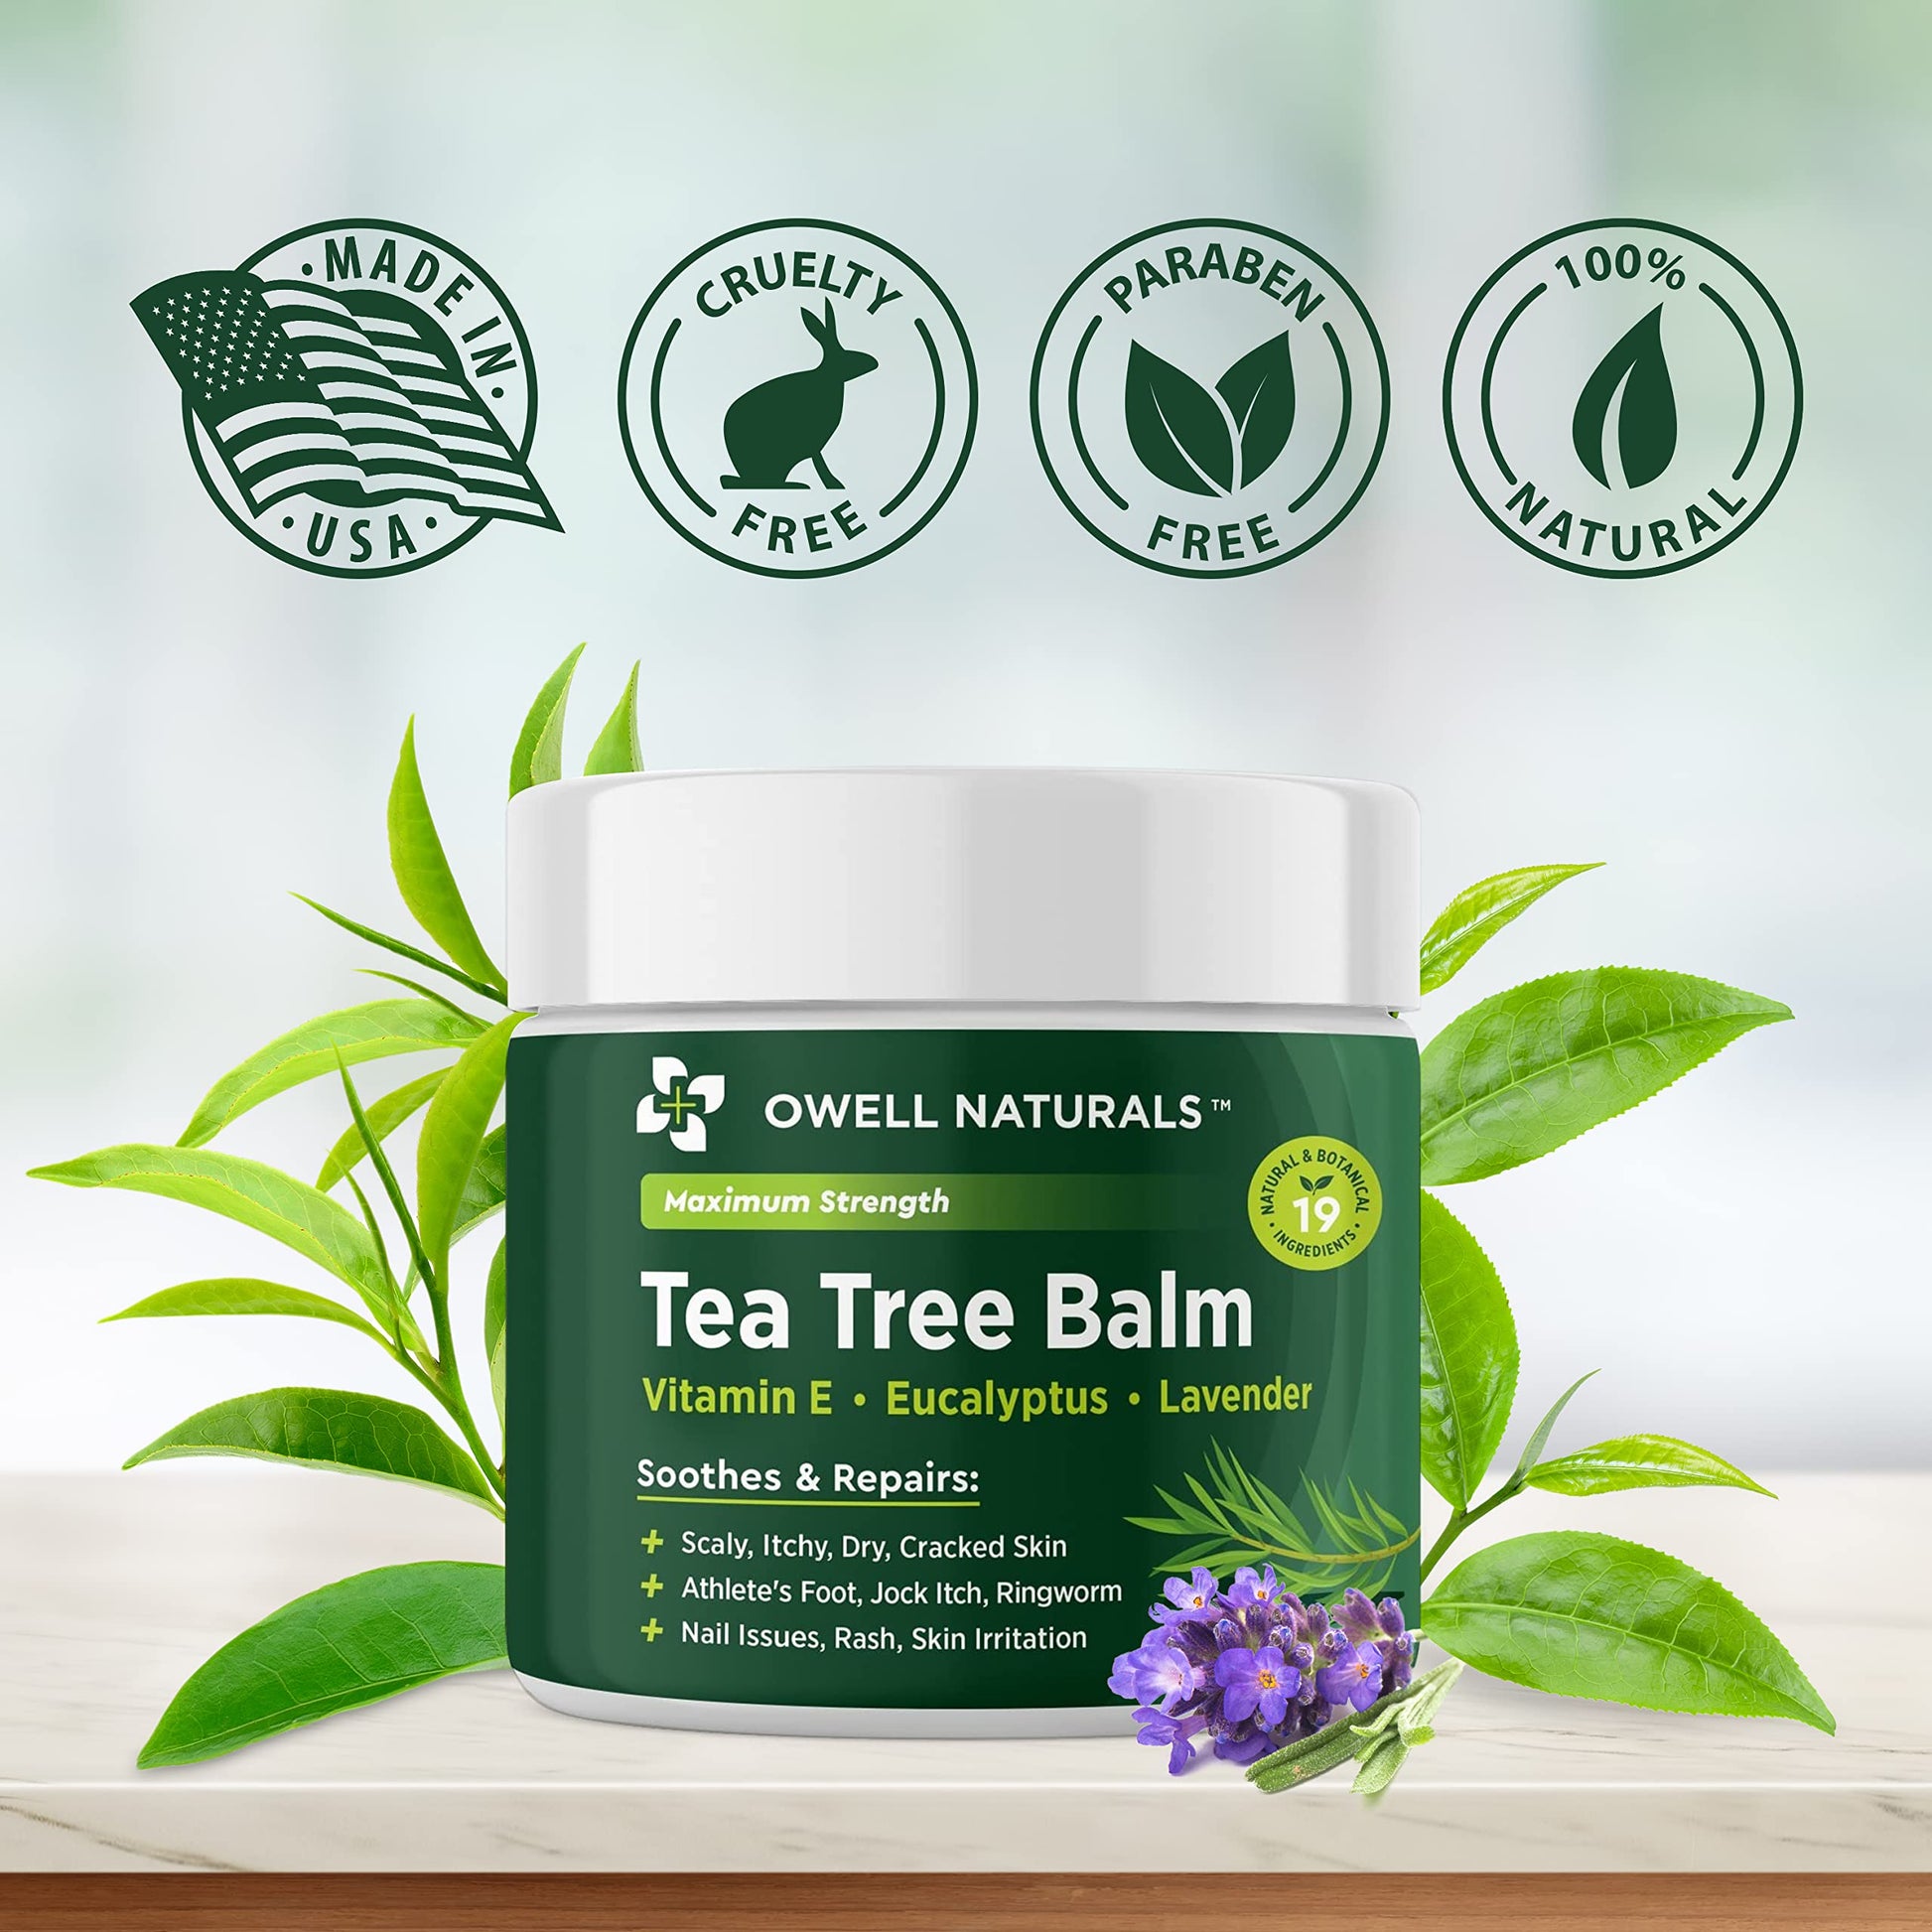 OWELL NATURALS Tea Tree Balm for Itchy, Dry and Cracked Skin